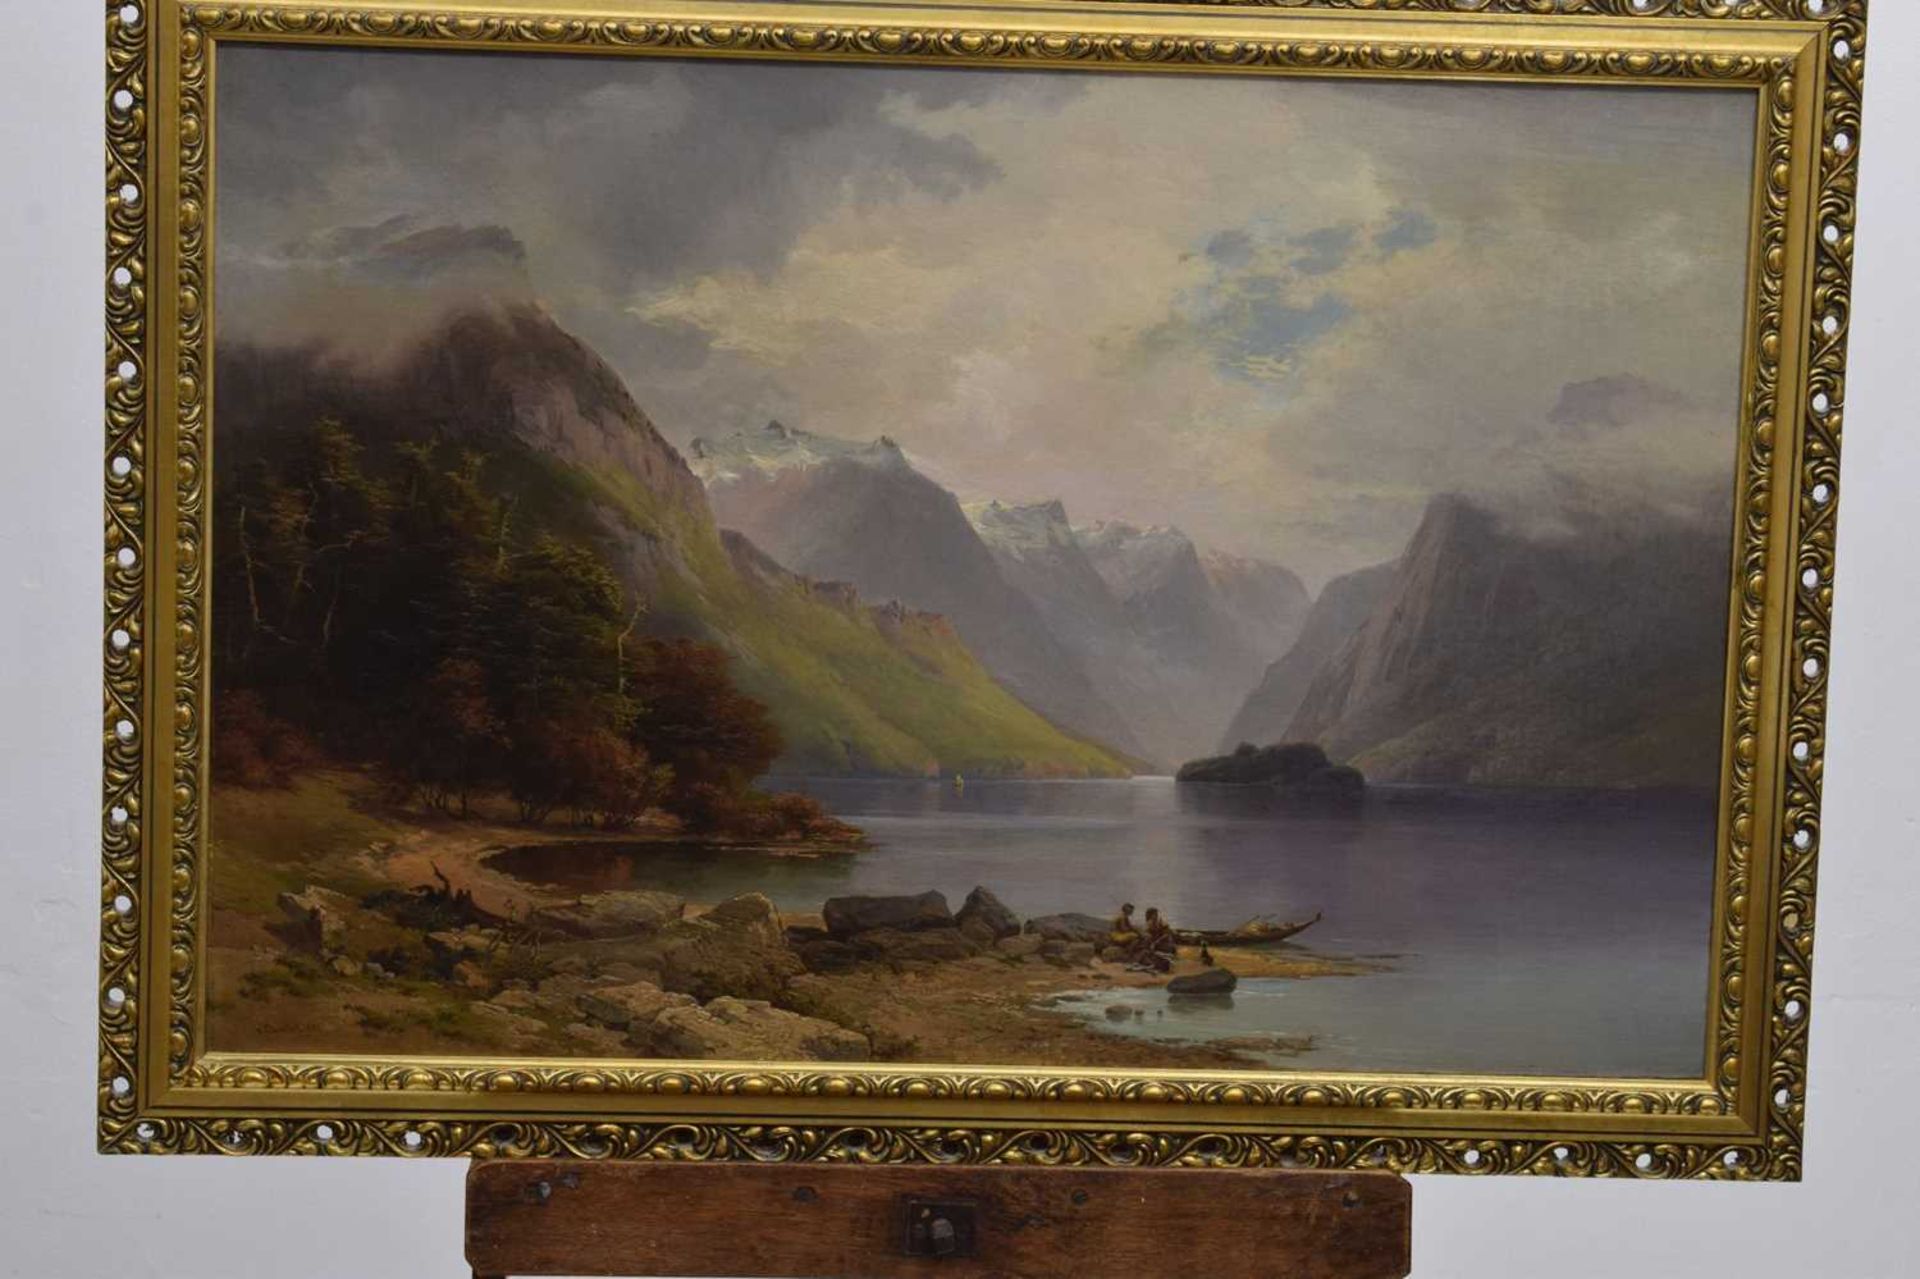 Nicholas Chevalier - New Zealand oil on canvas - Lake Manapouri - Image 2 of 16